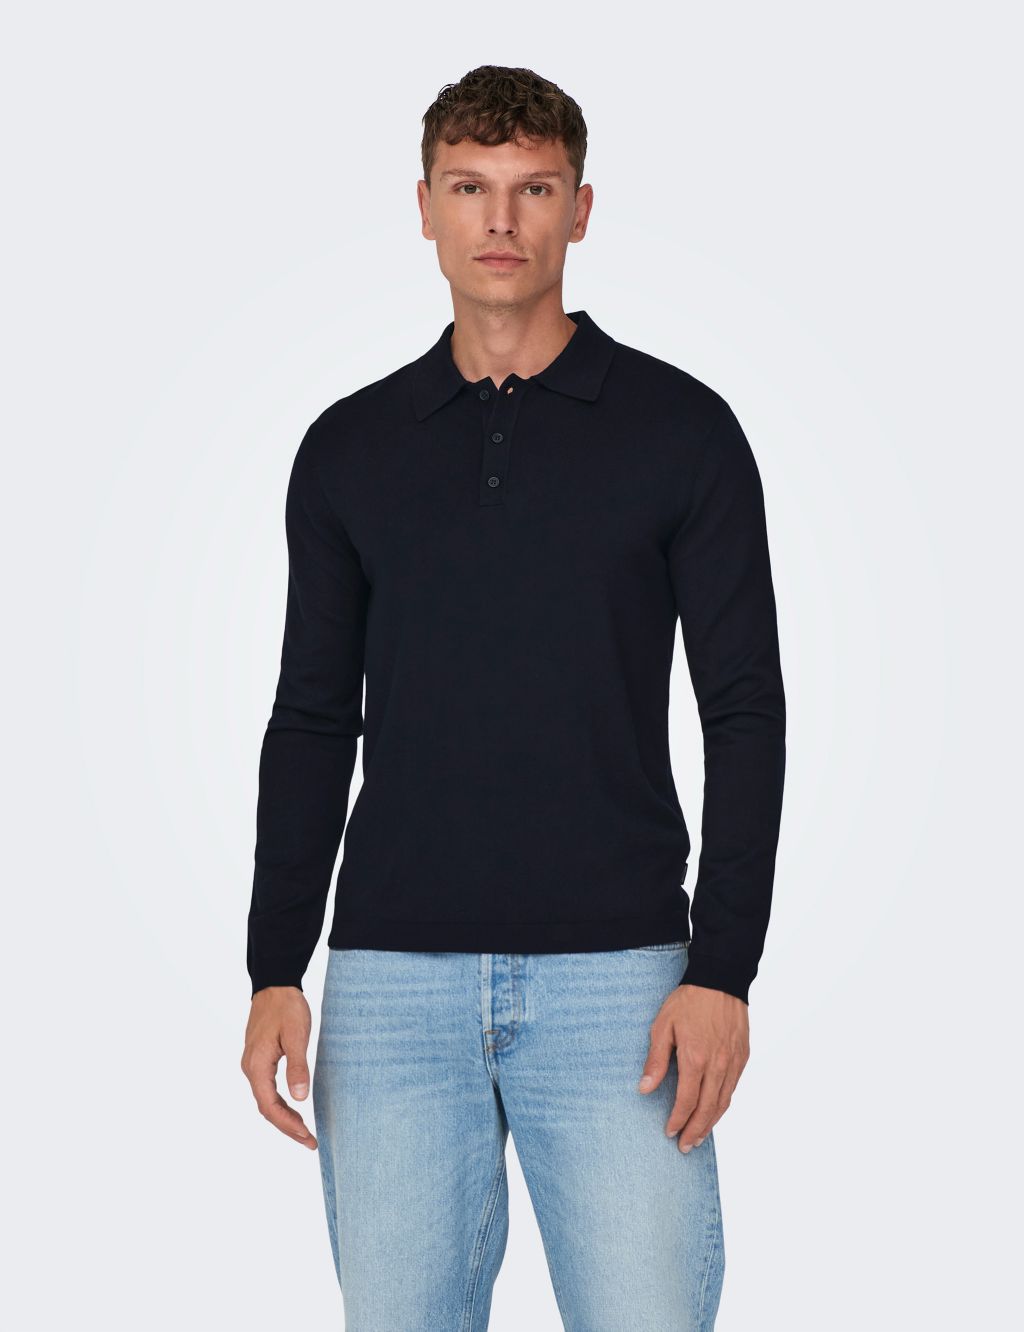 Knitted Polo Shirt image 1